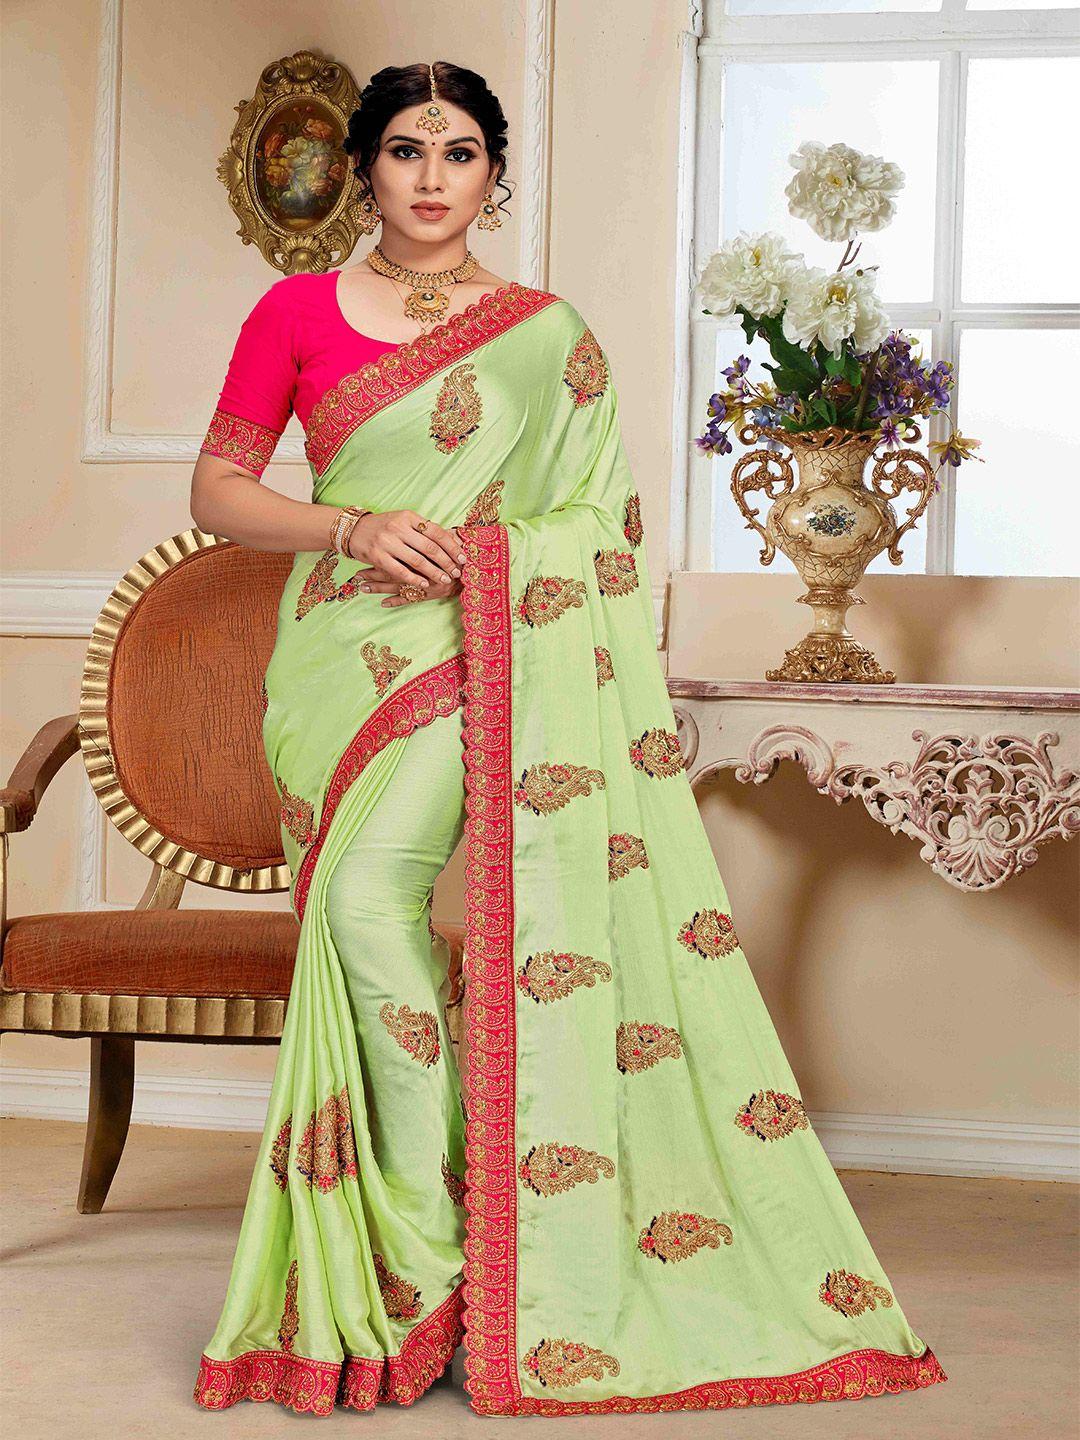 mitera green ethnic motifs embroidered beads and stones saree